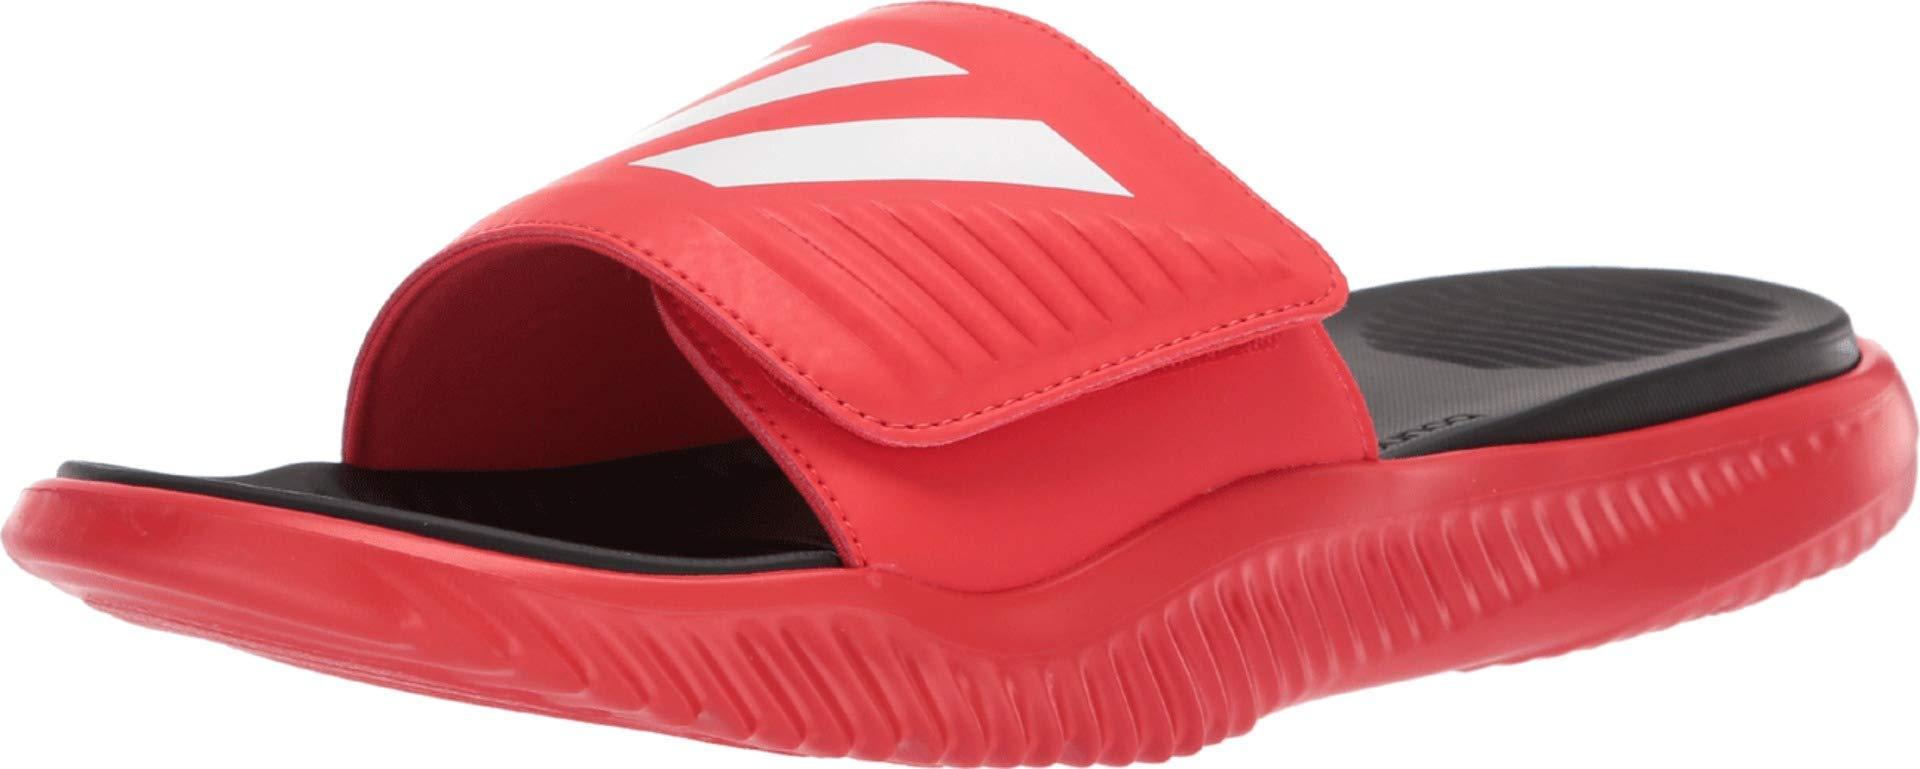 adidas Alphabounce Slide in Red/White (Red) for Men | Lyst